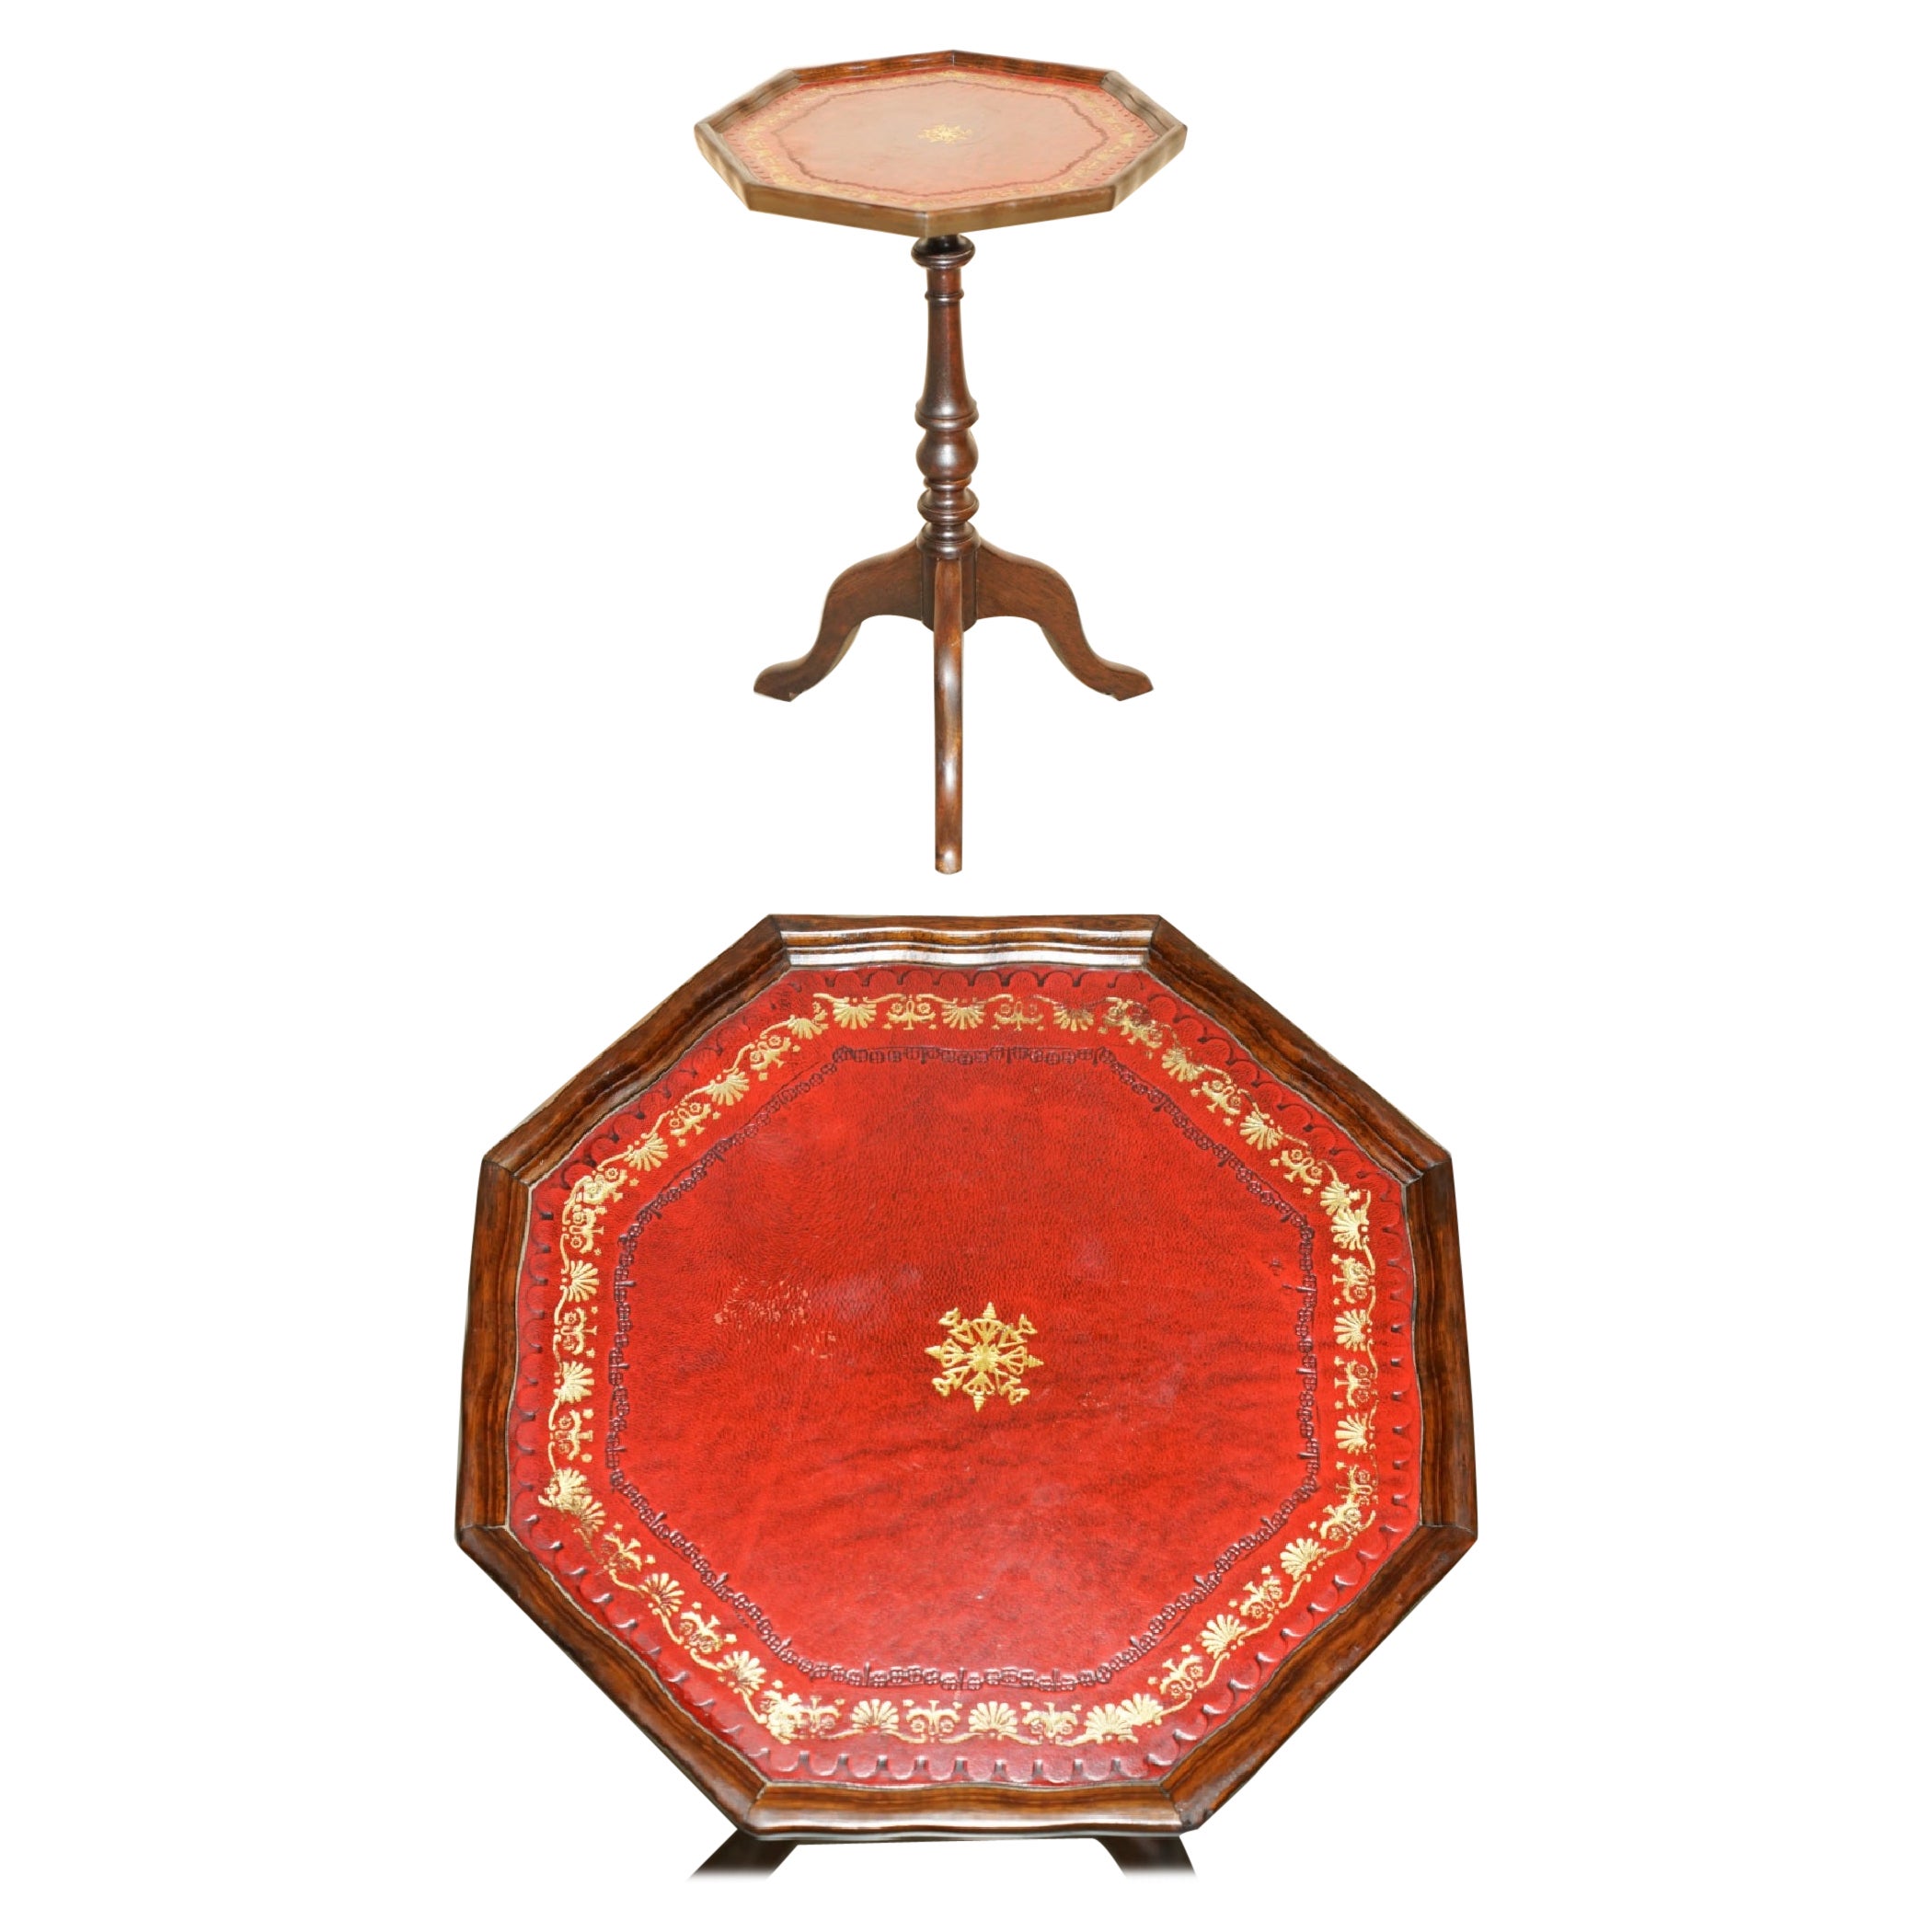 LOVELY LEAF EMBOSSED OXBLOOD LEATHER TRIPOD SiDE END LAMP WINE TABLE